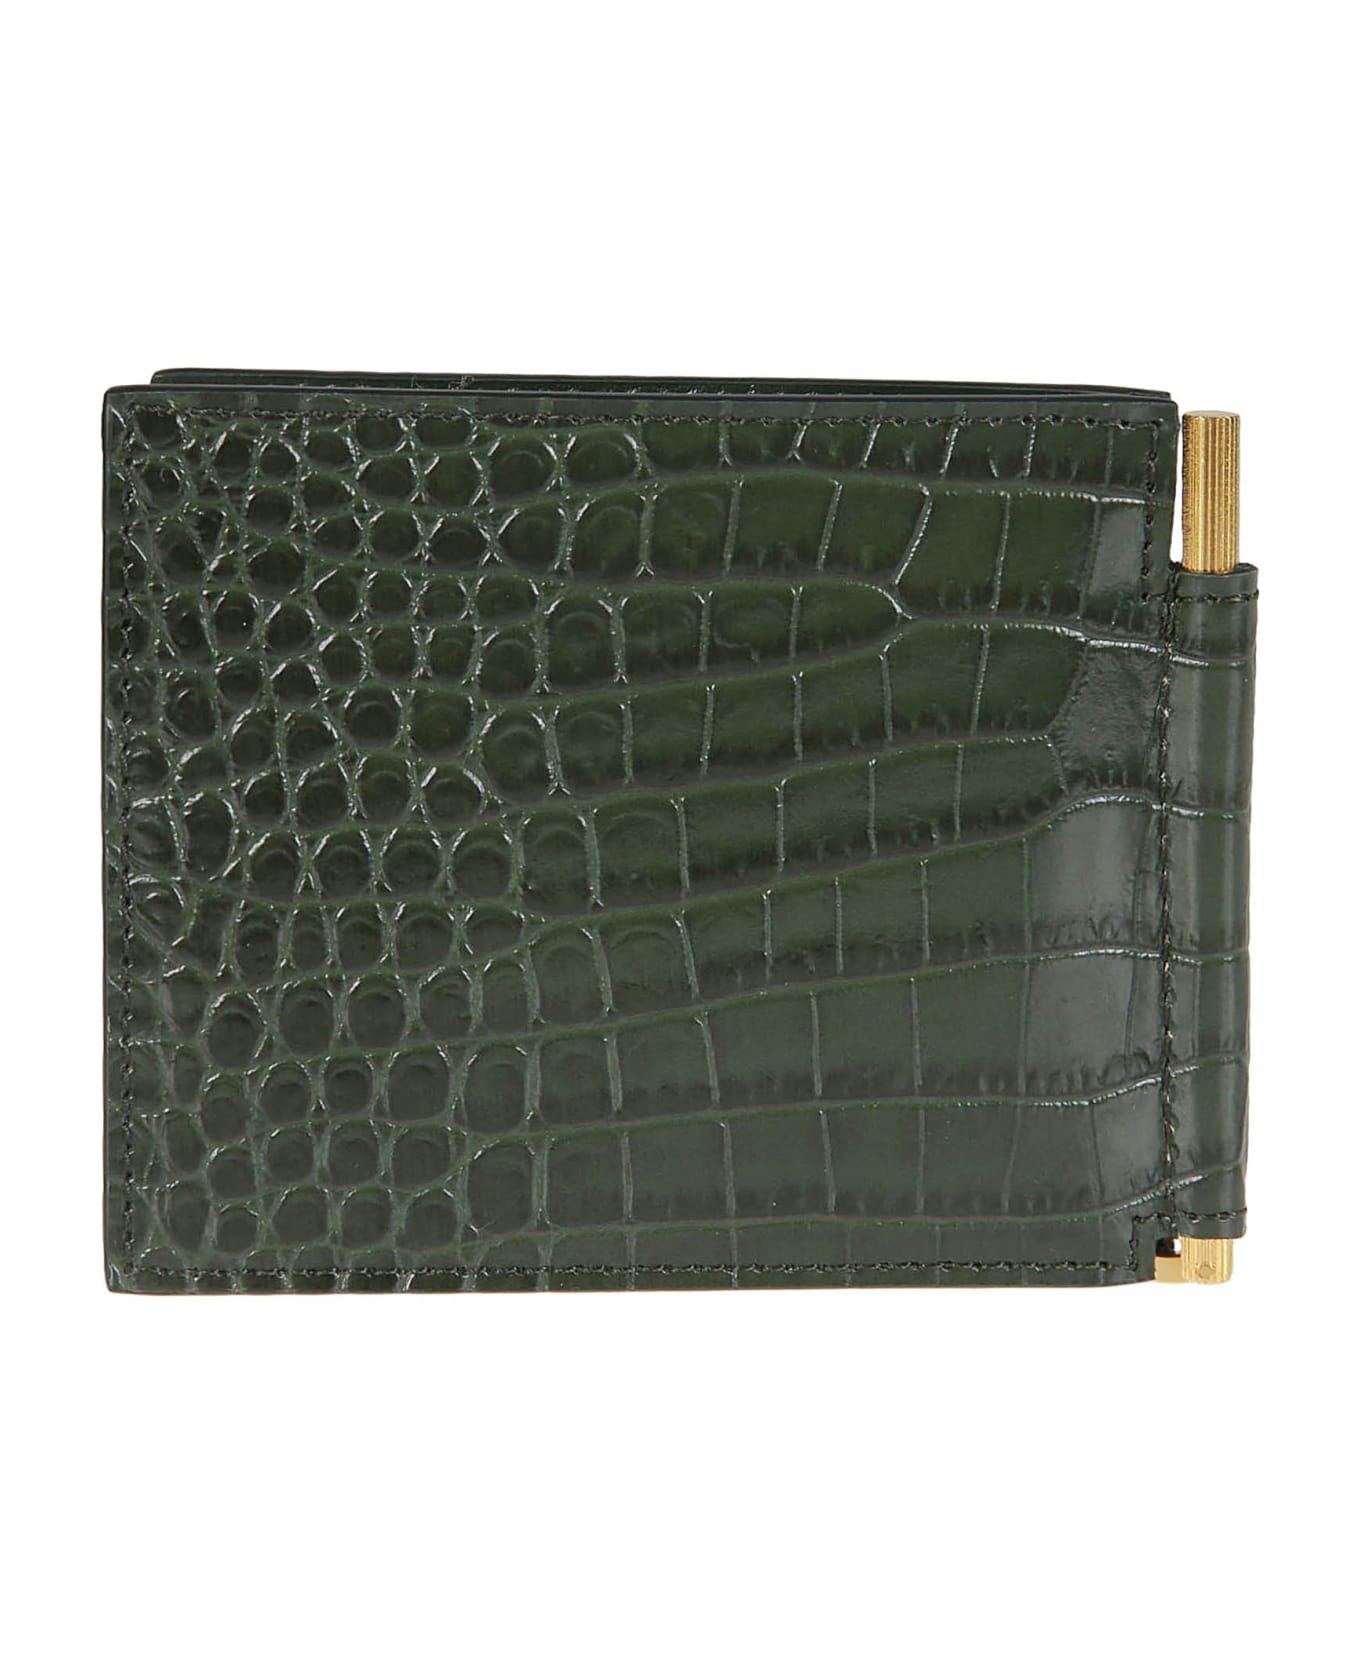 Tom Ford Printed Alligator Money Clip Wallet - Rifle Green 財布